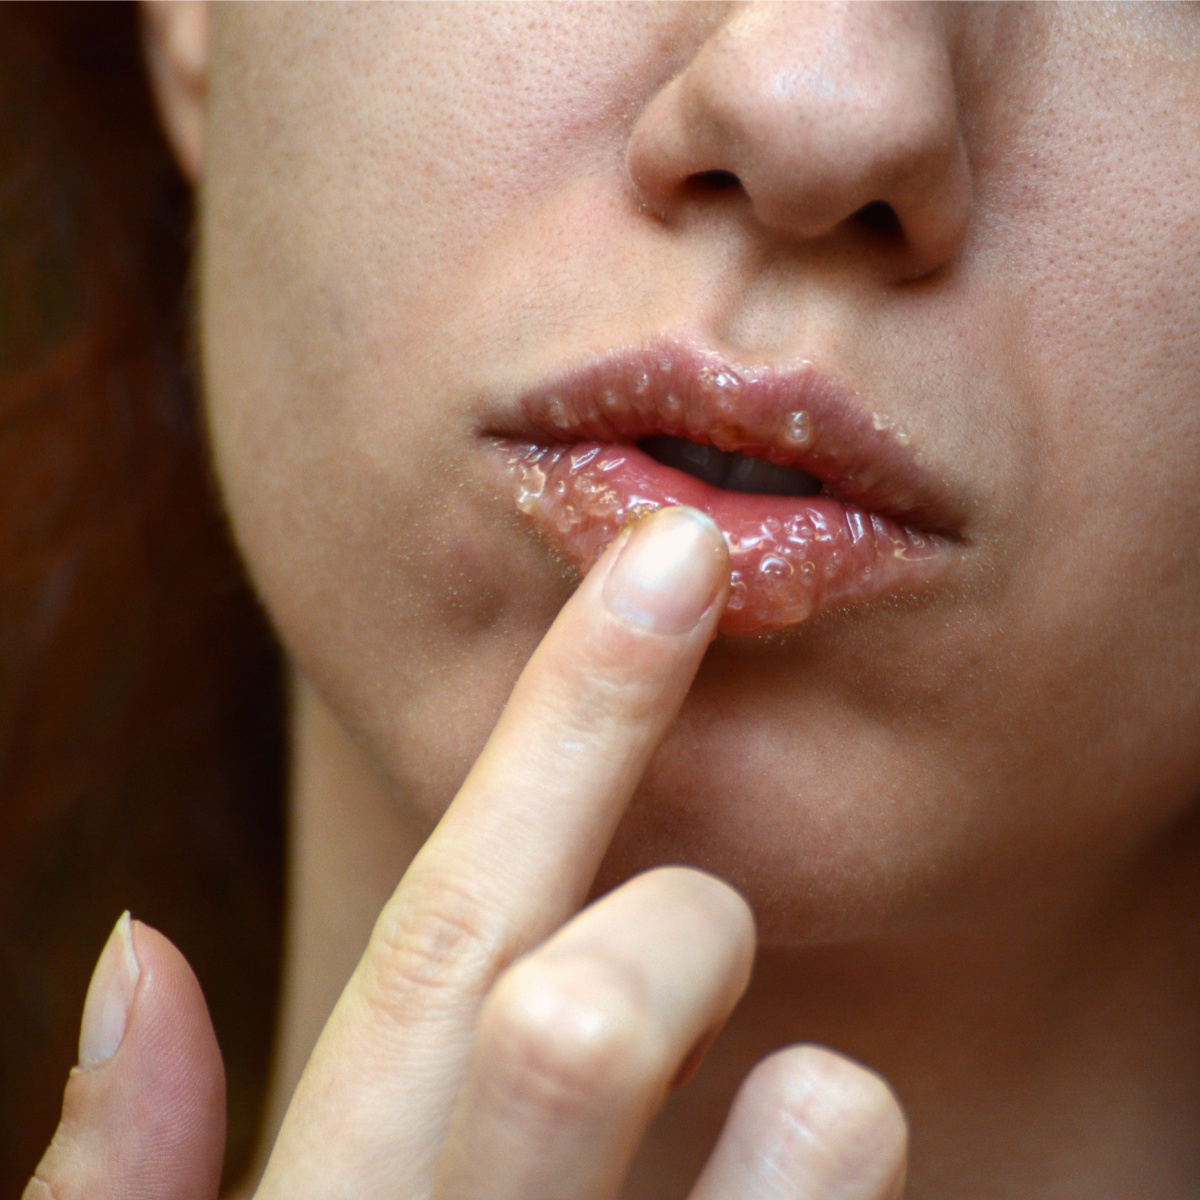 homemade exfoliating lip scrub woman applying product to lips with index finger